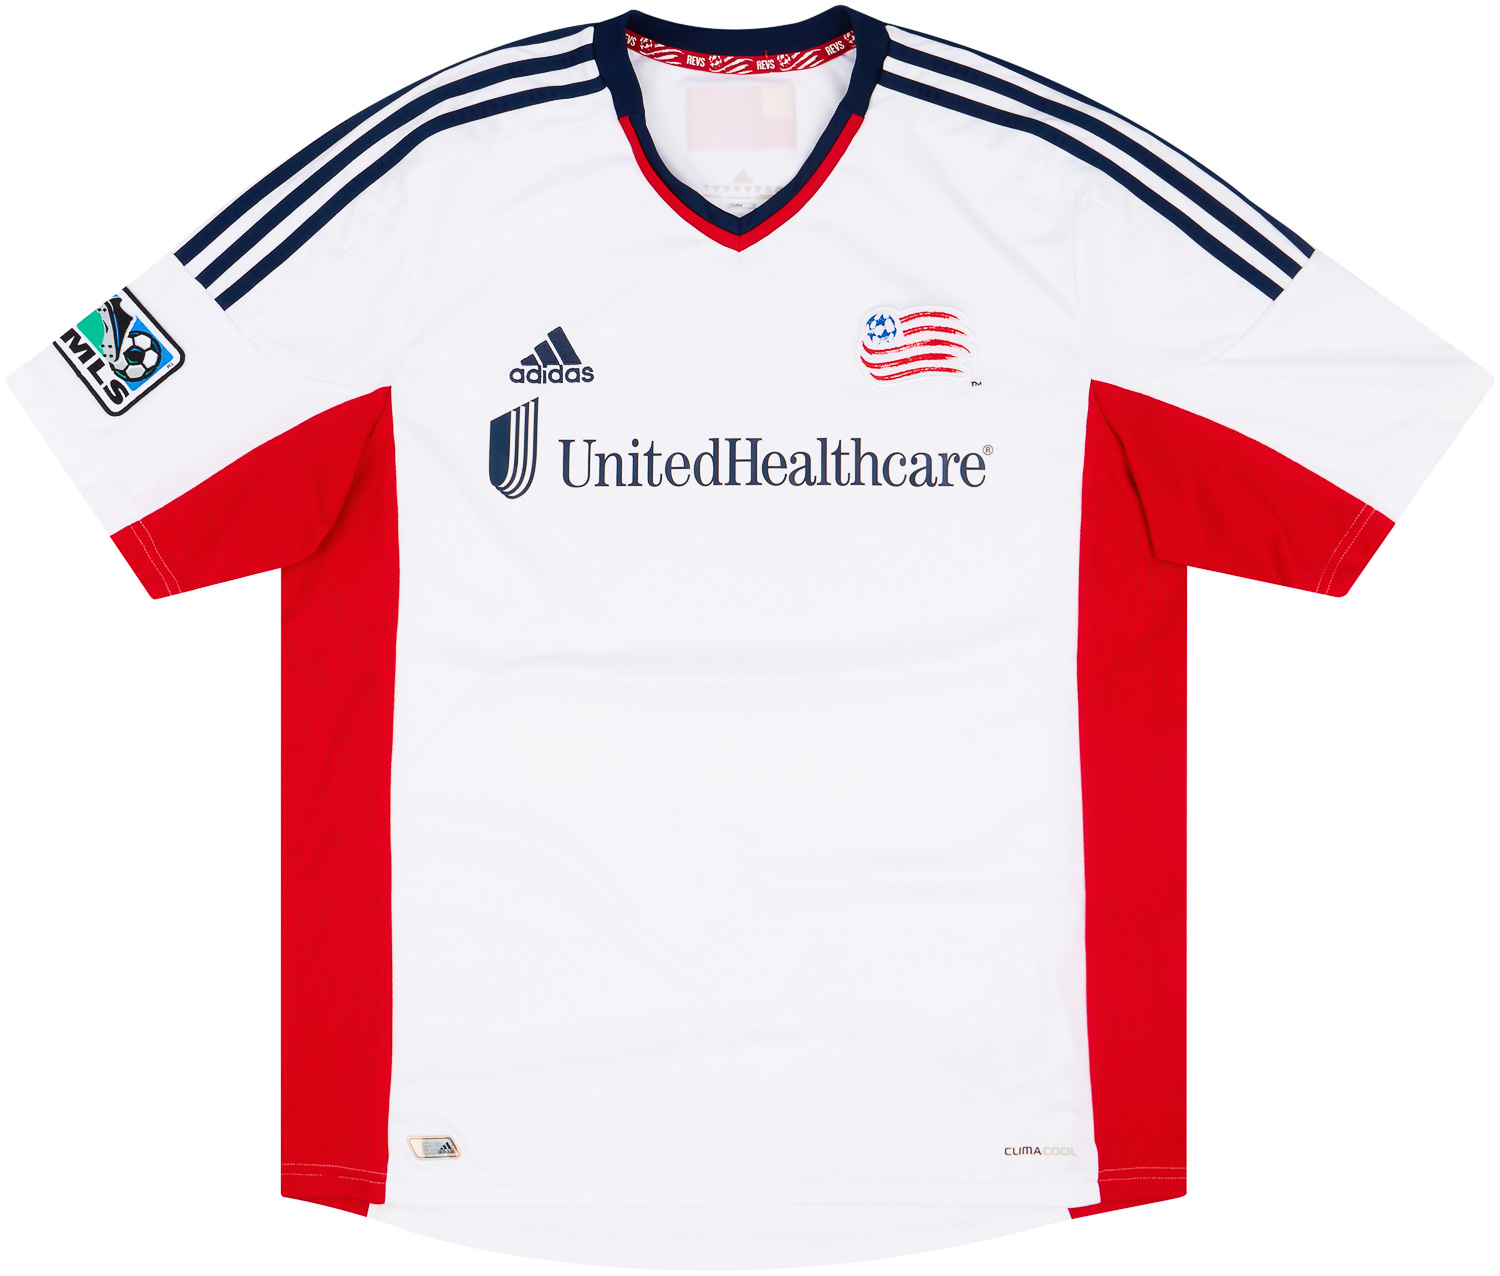 Old New England Revolution football shirts and soccer jerseys